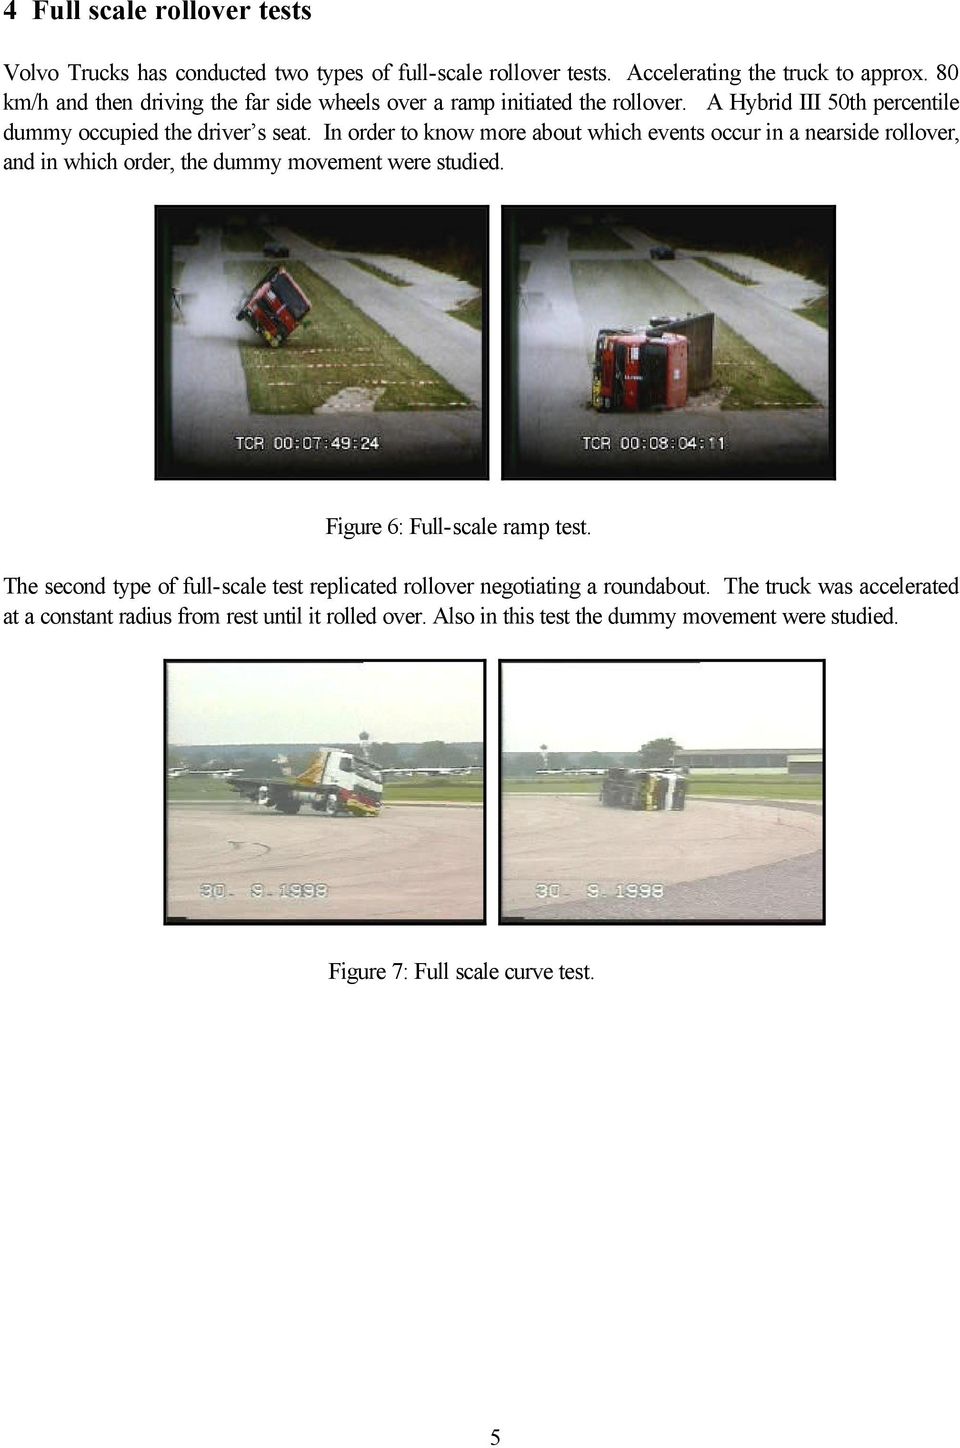 In order to know more about which events occur in a nearside rollover, and in which order, the dummy movement were studied. Figure 6: Full-scale ramp test.